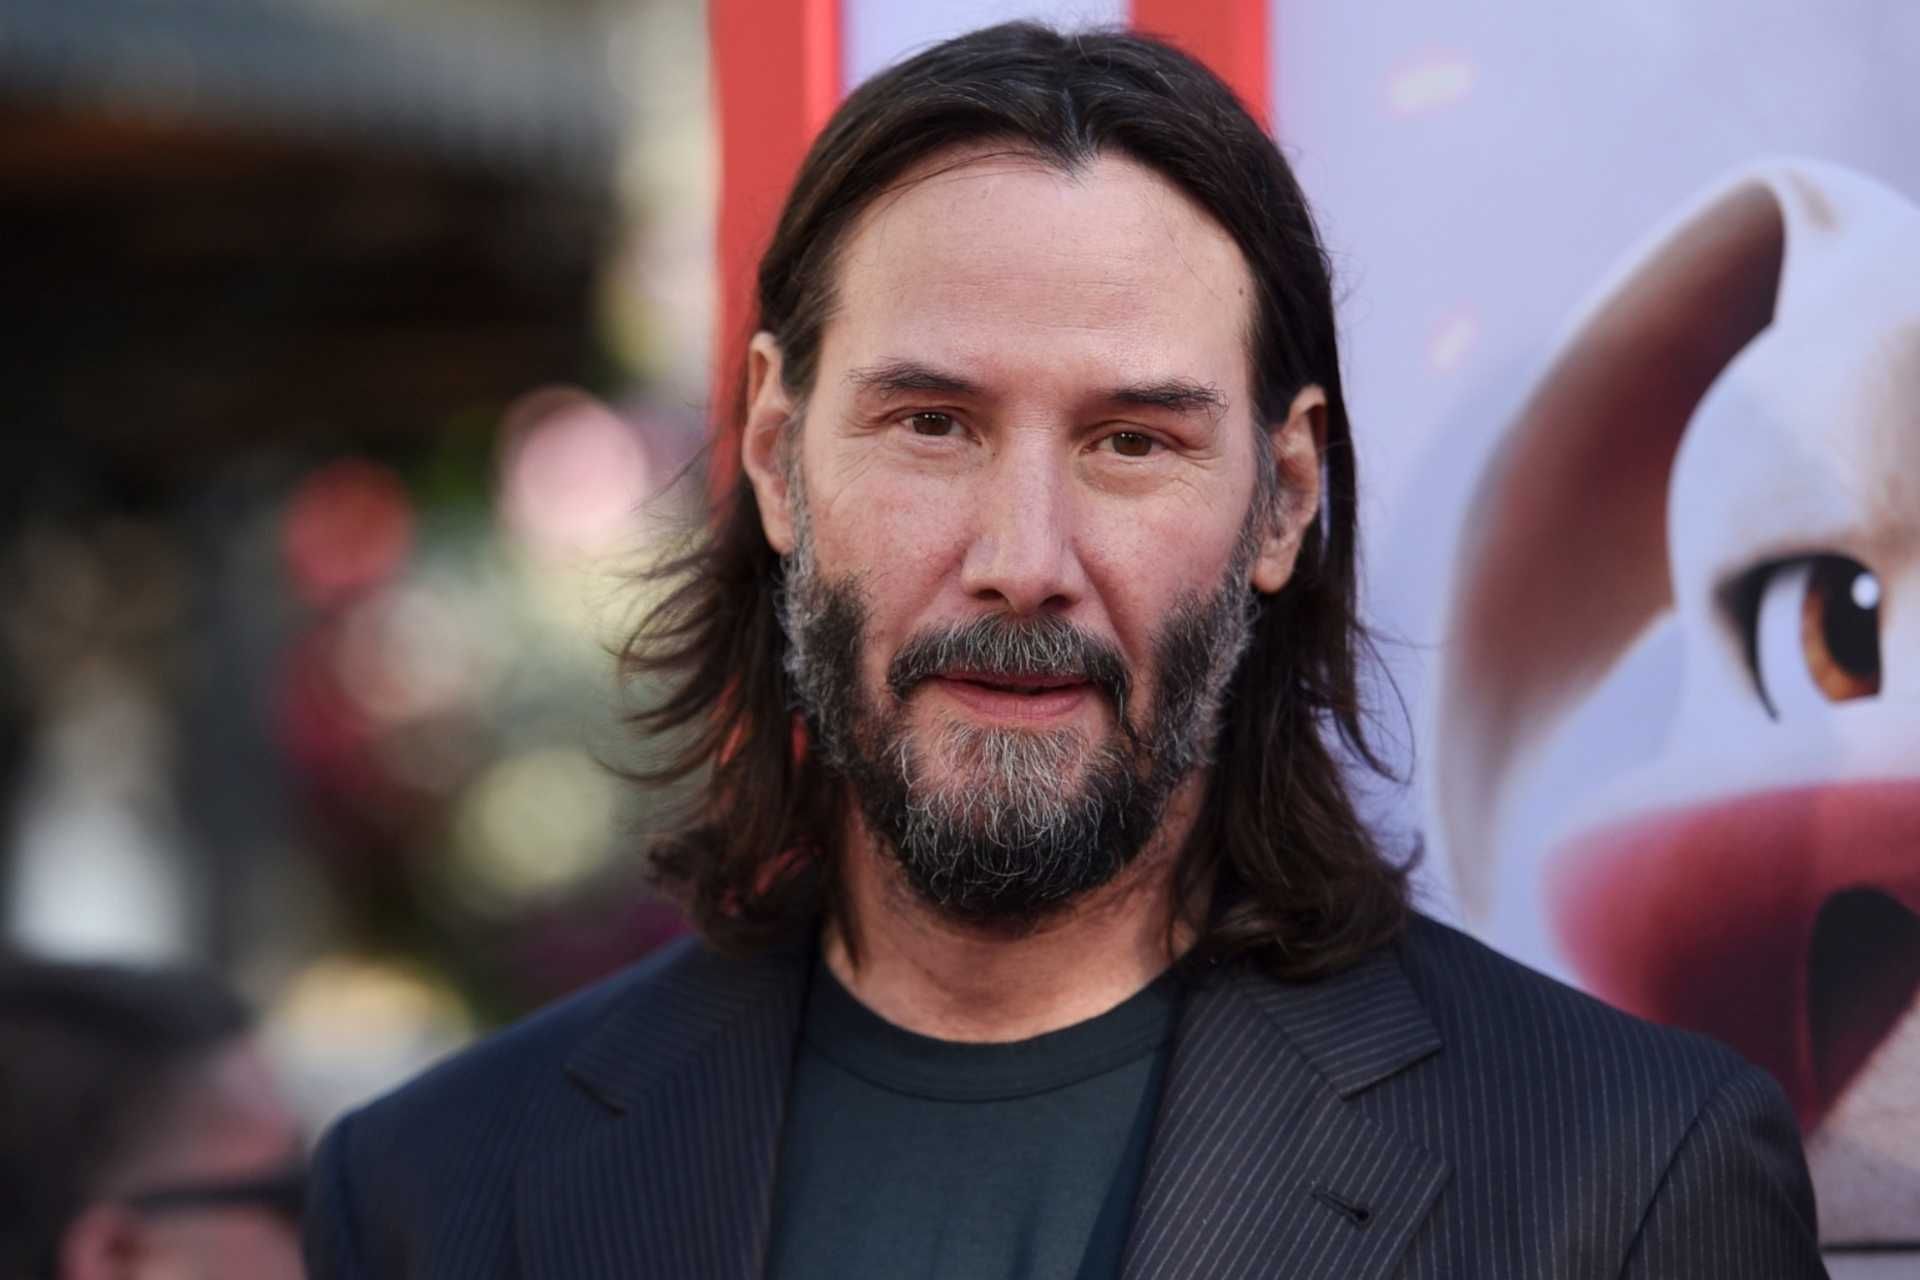 Keanu Reeves Recalls 'Bill & Ted' Audition 'Reminded me of a Roman Orgy